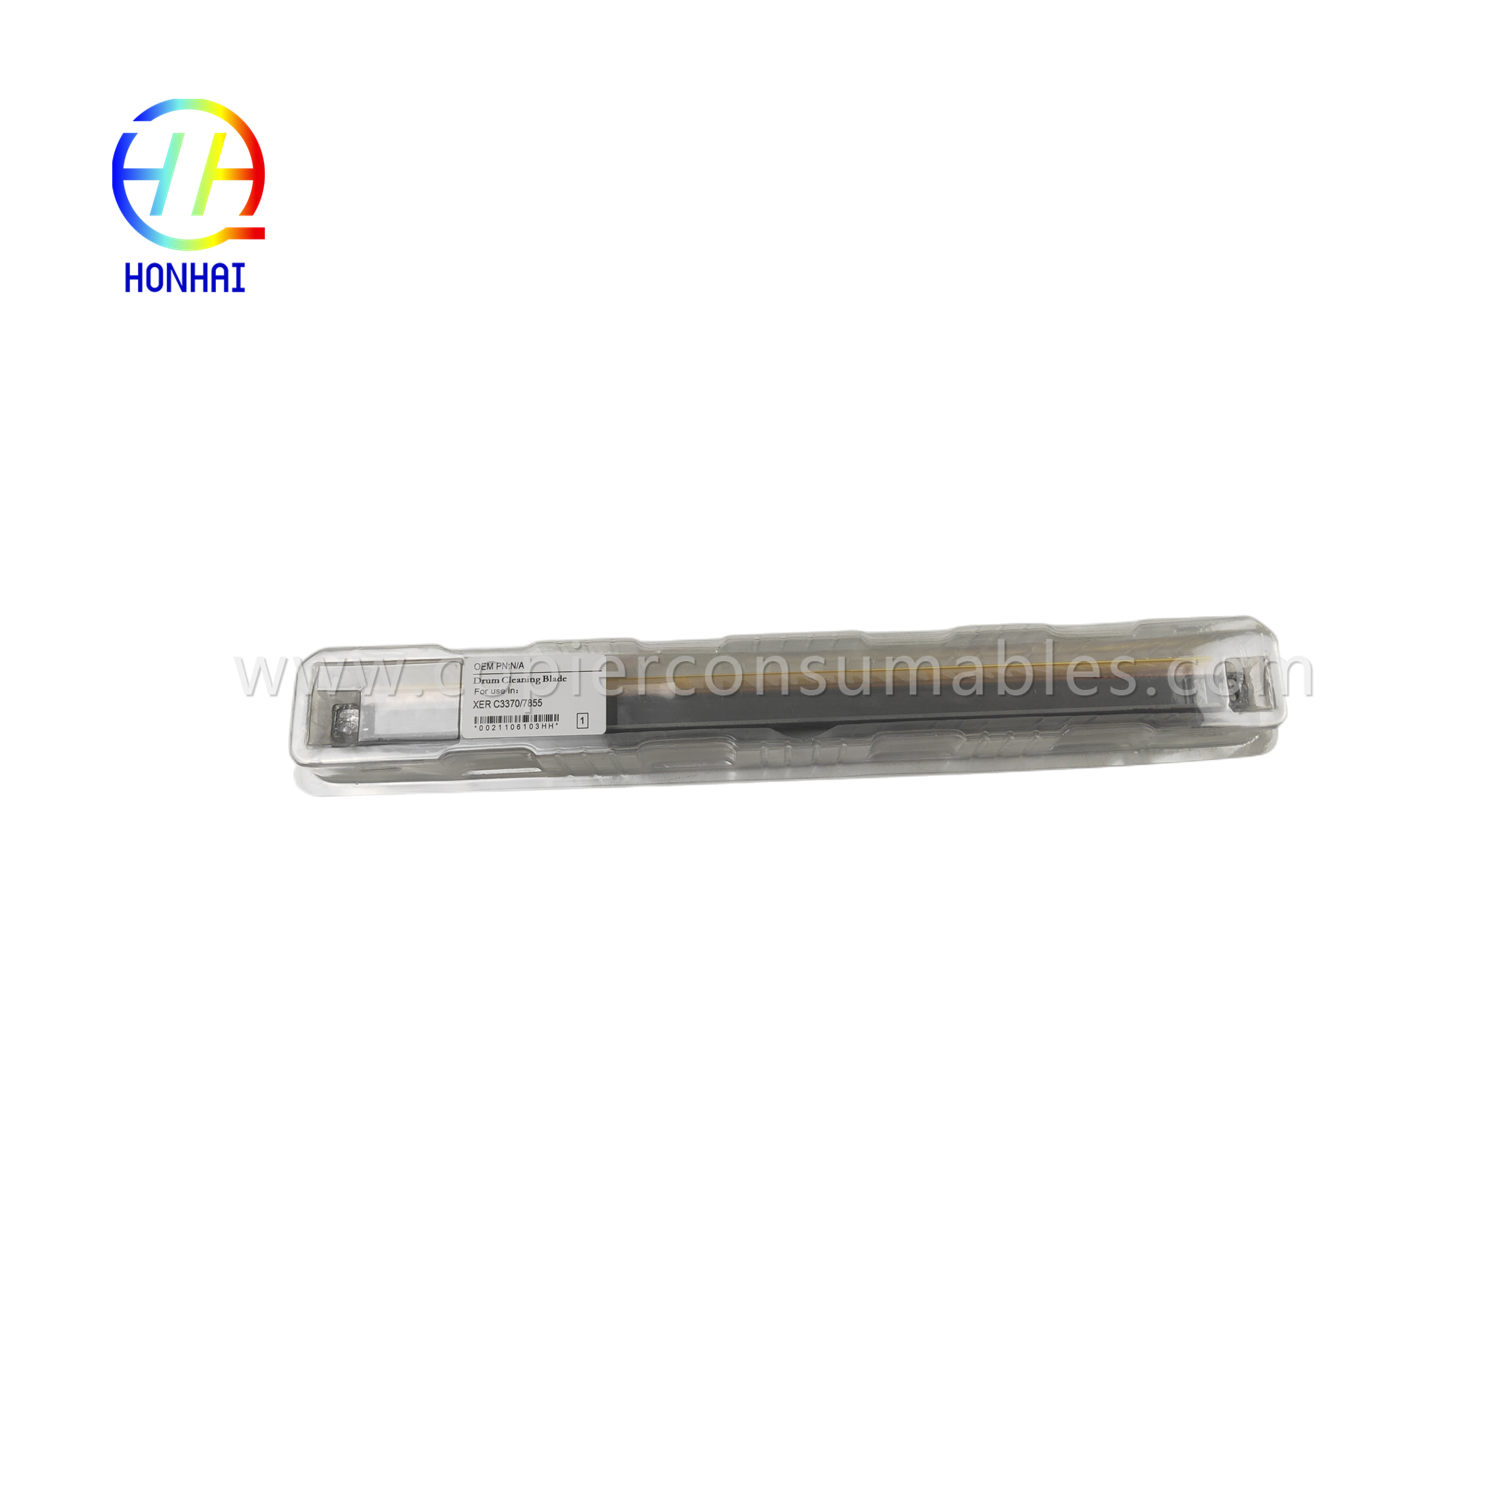 https://c585.goodao.net/original-drum-cleaning-blade-for-xerox-workcentre-7525-7530-7535-7545-7556-7830-7835-7845-7855-product/